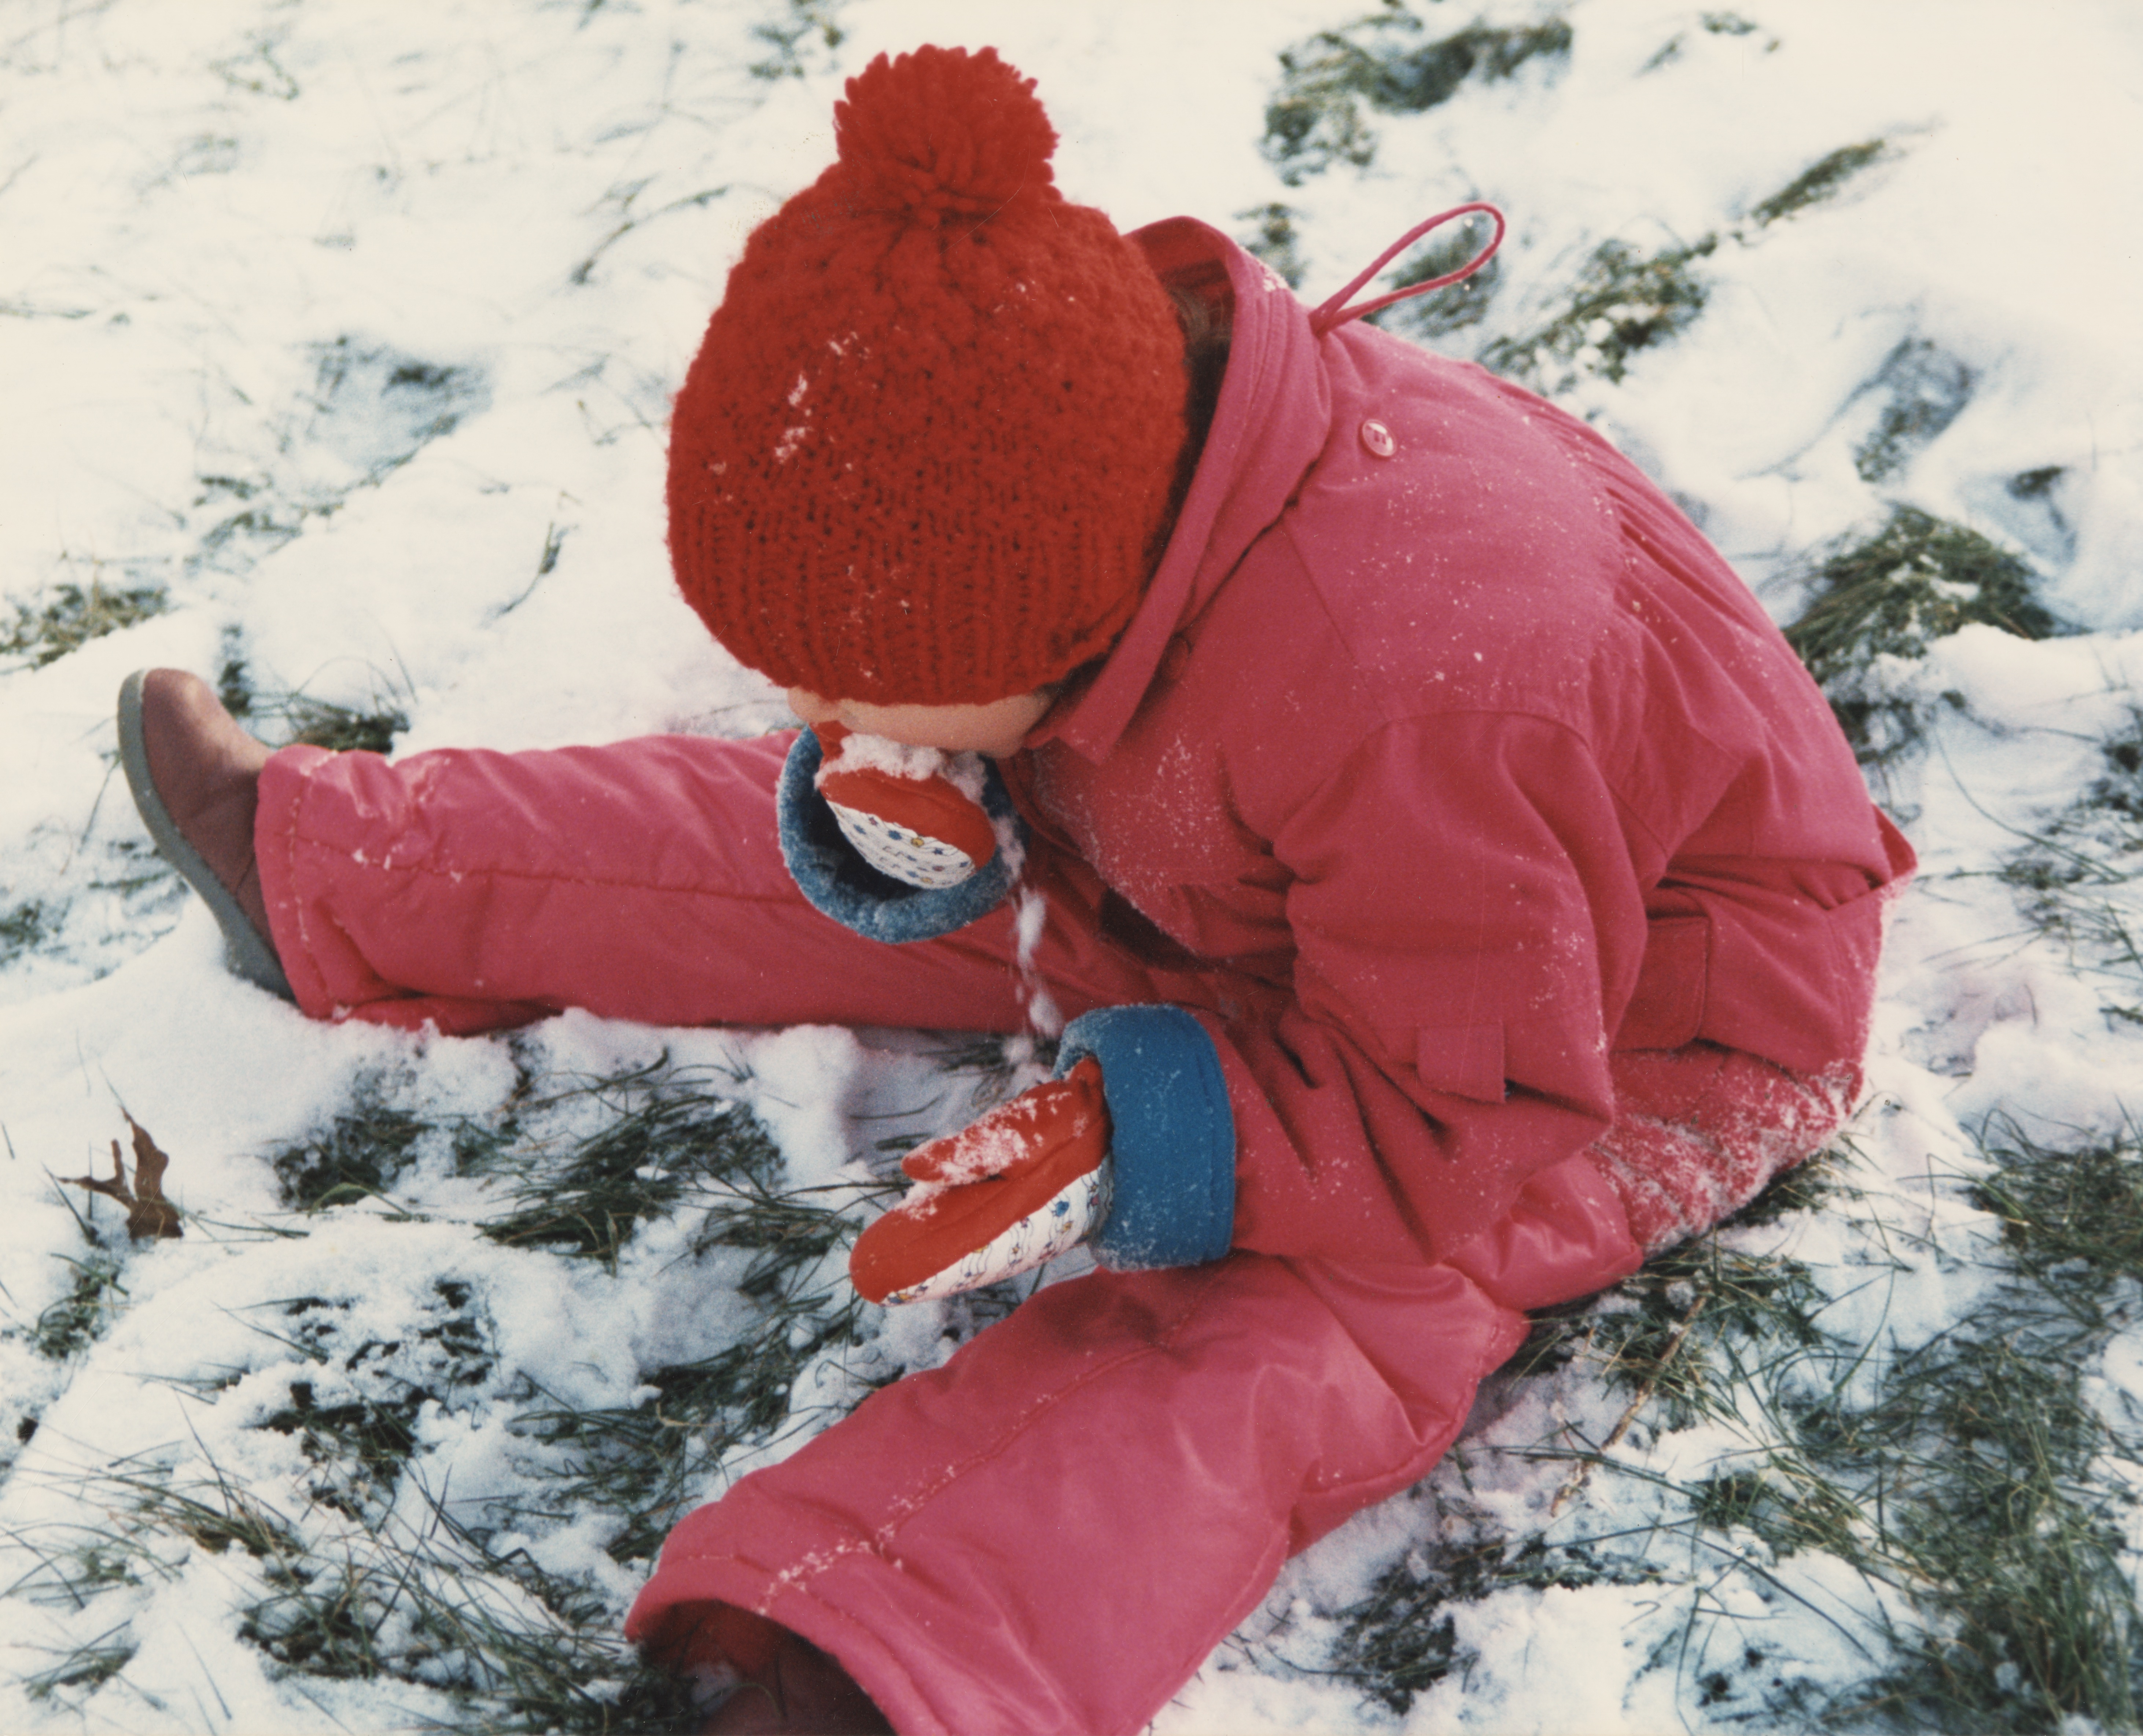 An undated photo from the 1980s, of a child eating snow near the banks of Coldwater Creek. The photo is from a scrapbook kept by Sandy Delcoure, who lived on Willow Creek in Florissant and donated the scrapbook to the Kay Drey Mallinckrodt Collection. (State Historical Society of Missouri, Kay Drey Mallinckrodt Collection, 1943-2006.)